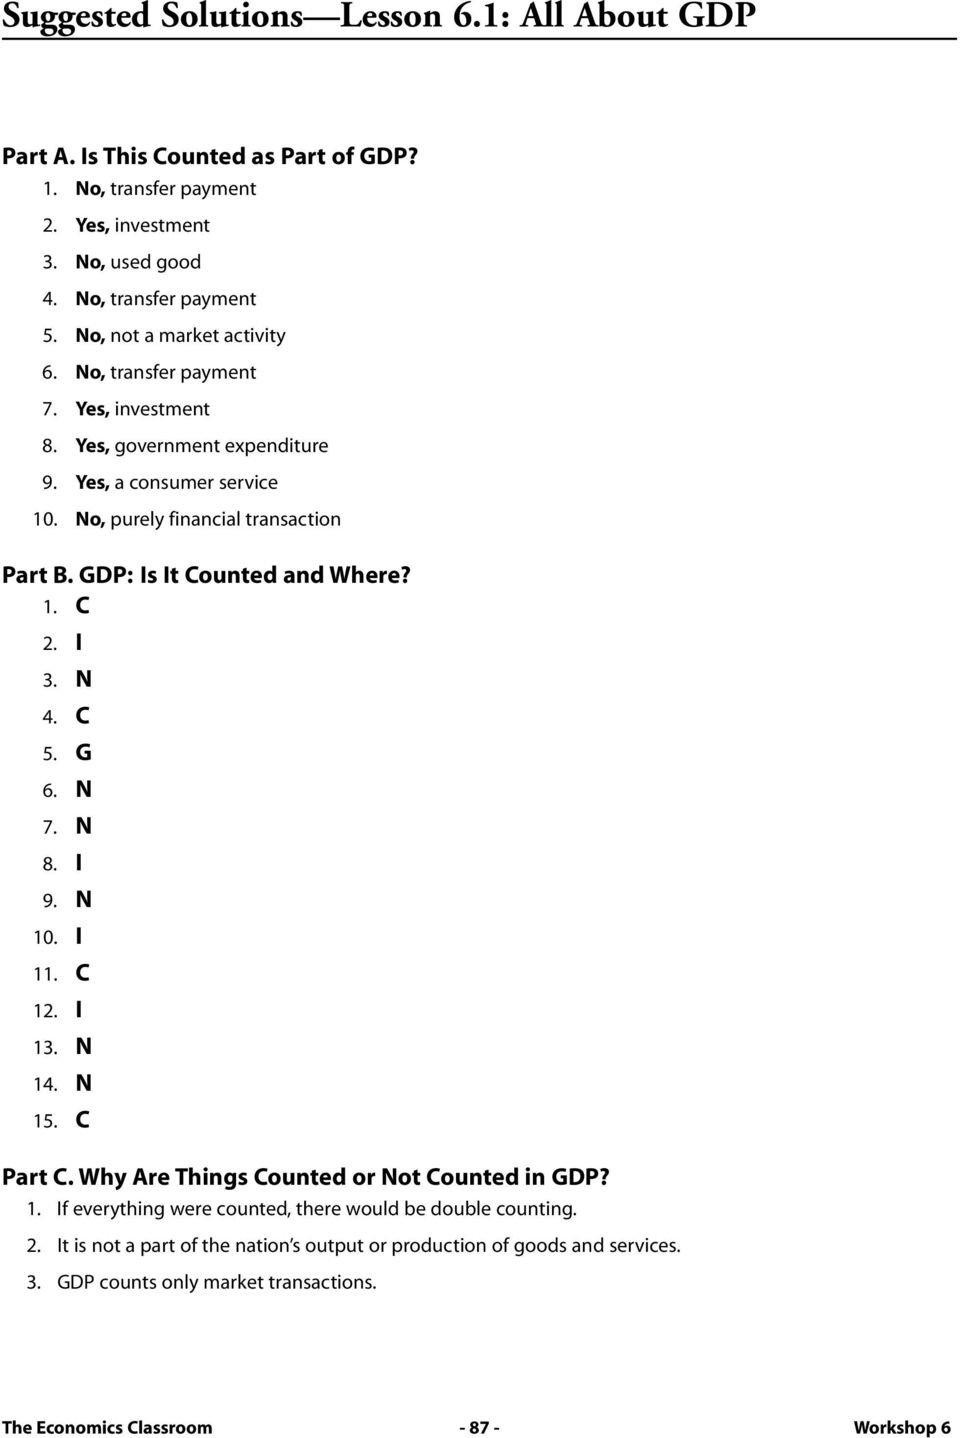 GDP: Is It Counted and Where? 1. C 2. I 3. N 4. C 5. G 6. N 7. N 8. I 9. N 10. I 11. C 12. I 13. N 14. N 15. C Part C. Why Are Things Counted or Not Counted in GDP? 1. If everything were counted, there would be double counting.